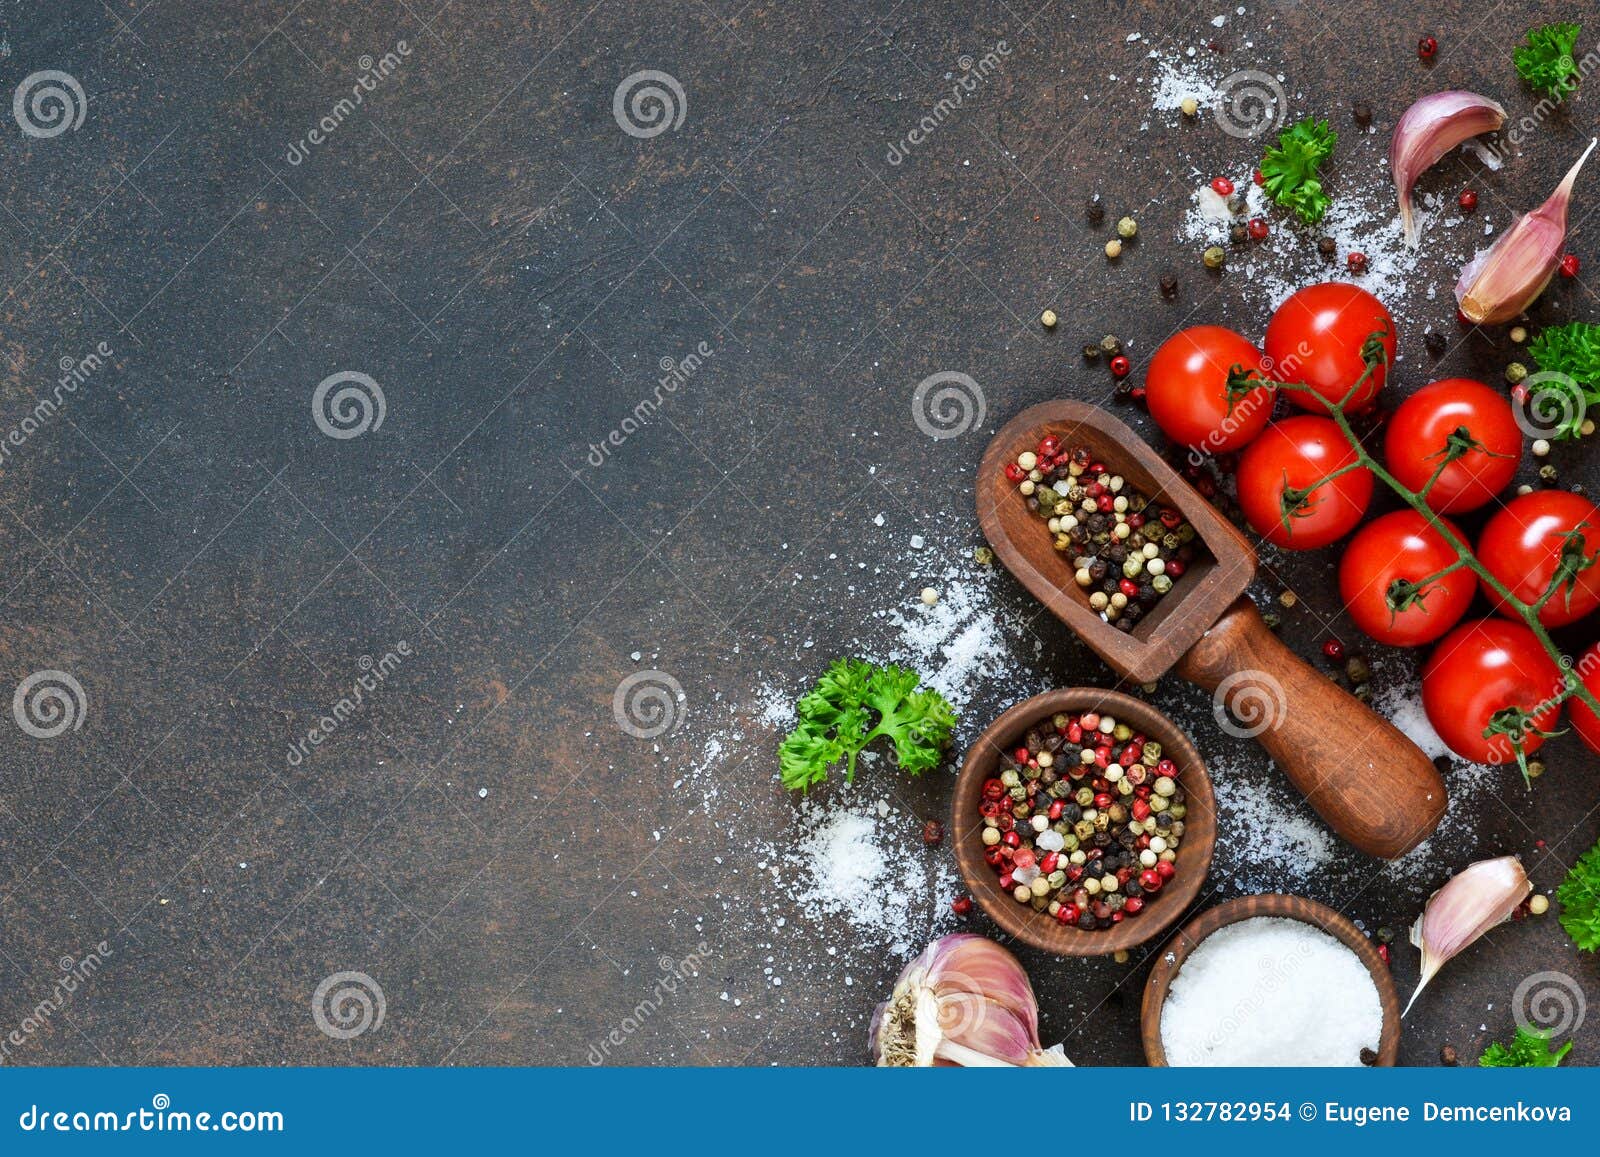 Ingredients for Cooking. Spices and Vegetables. Top View Stock Photo ...